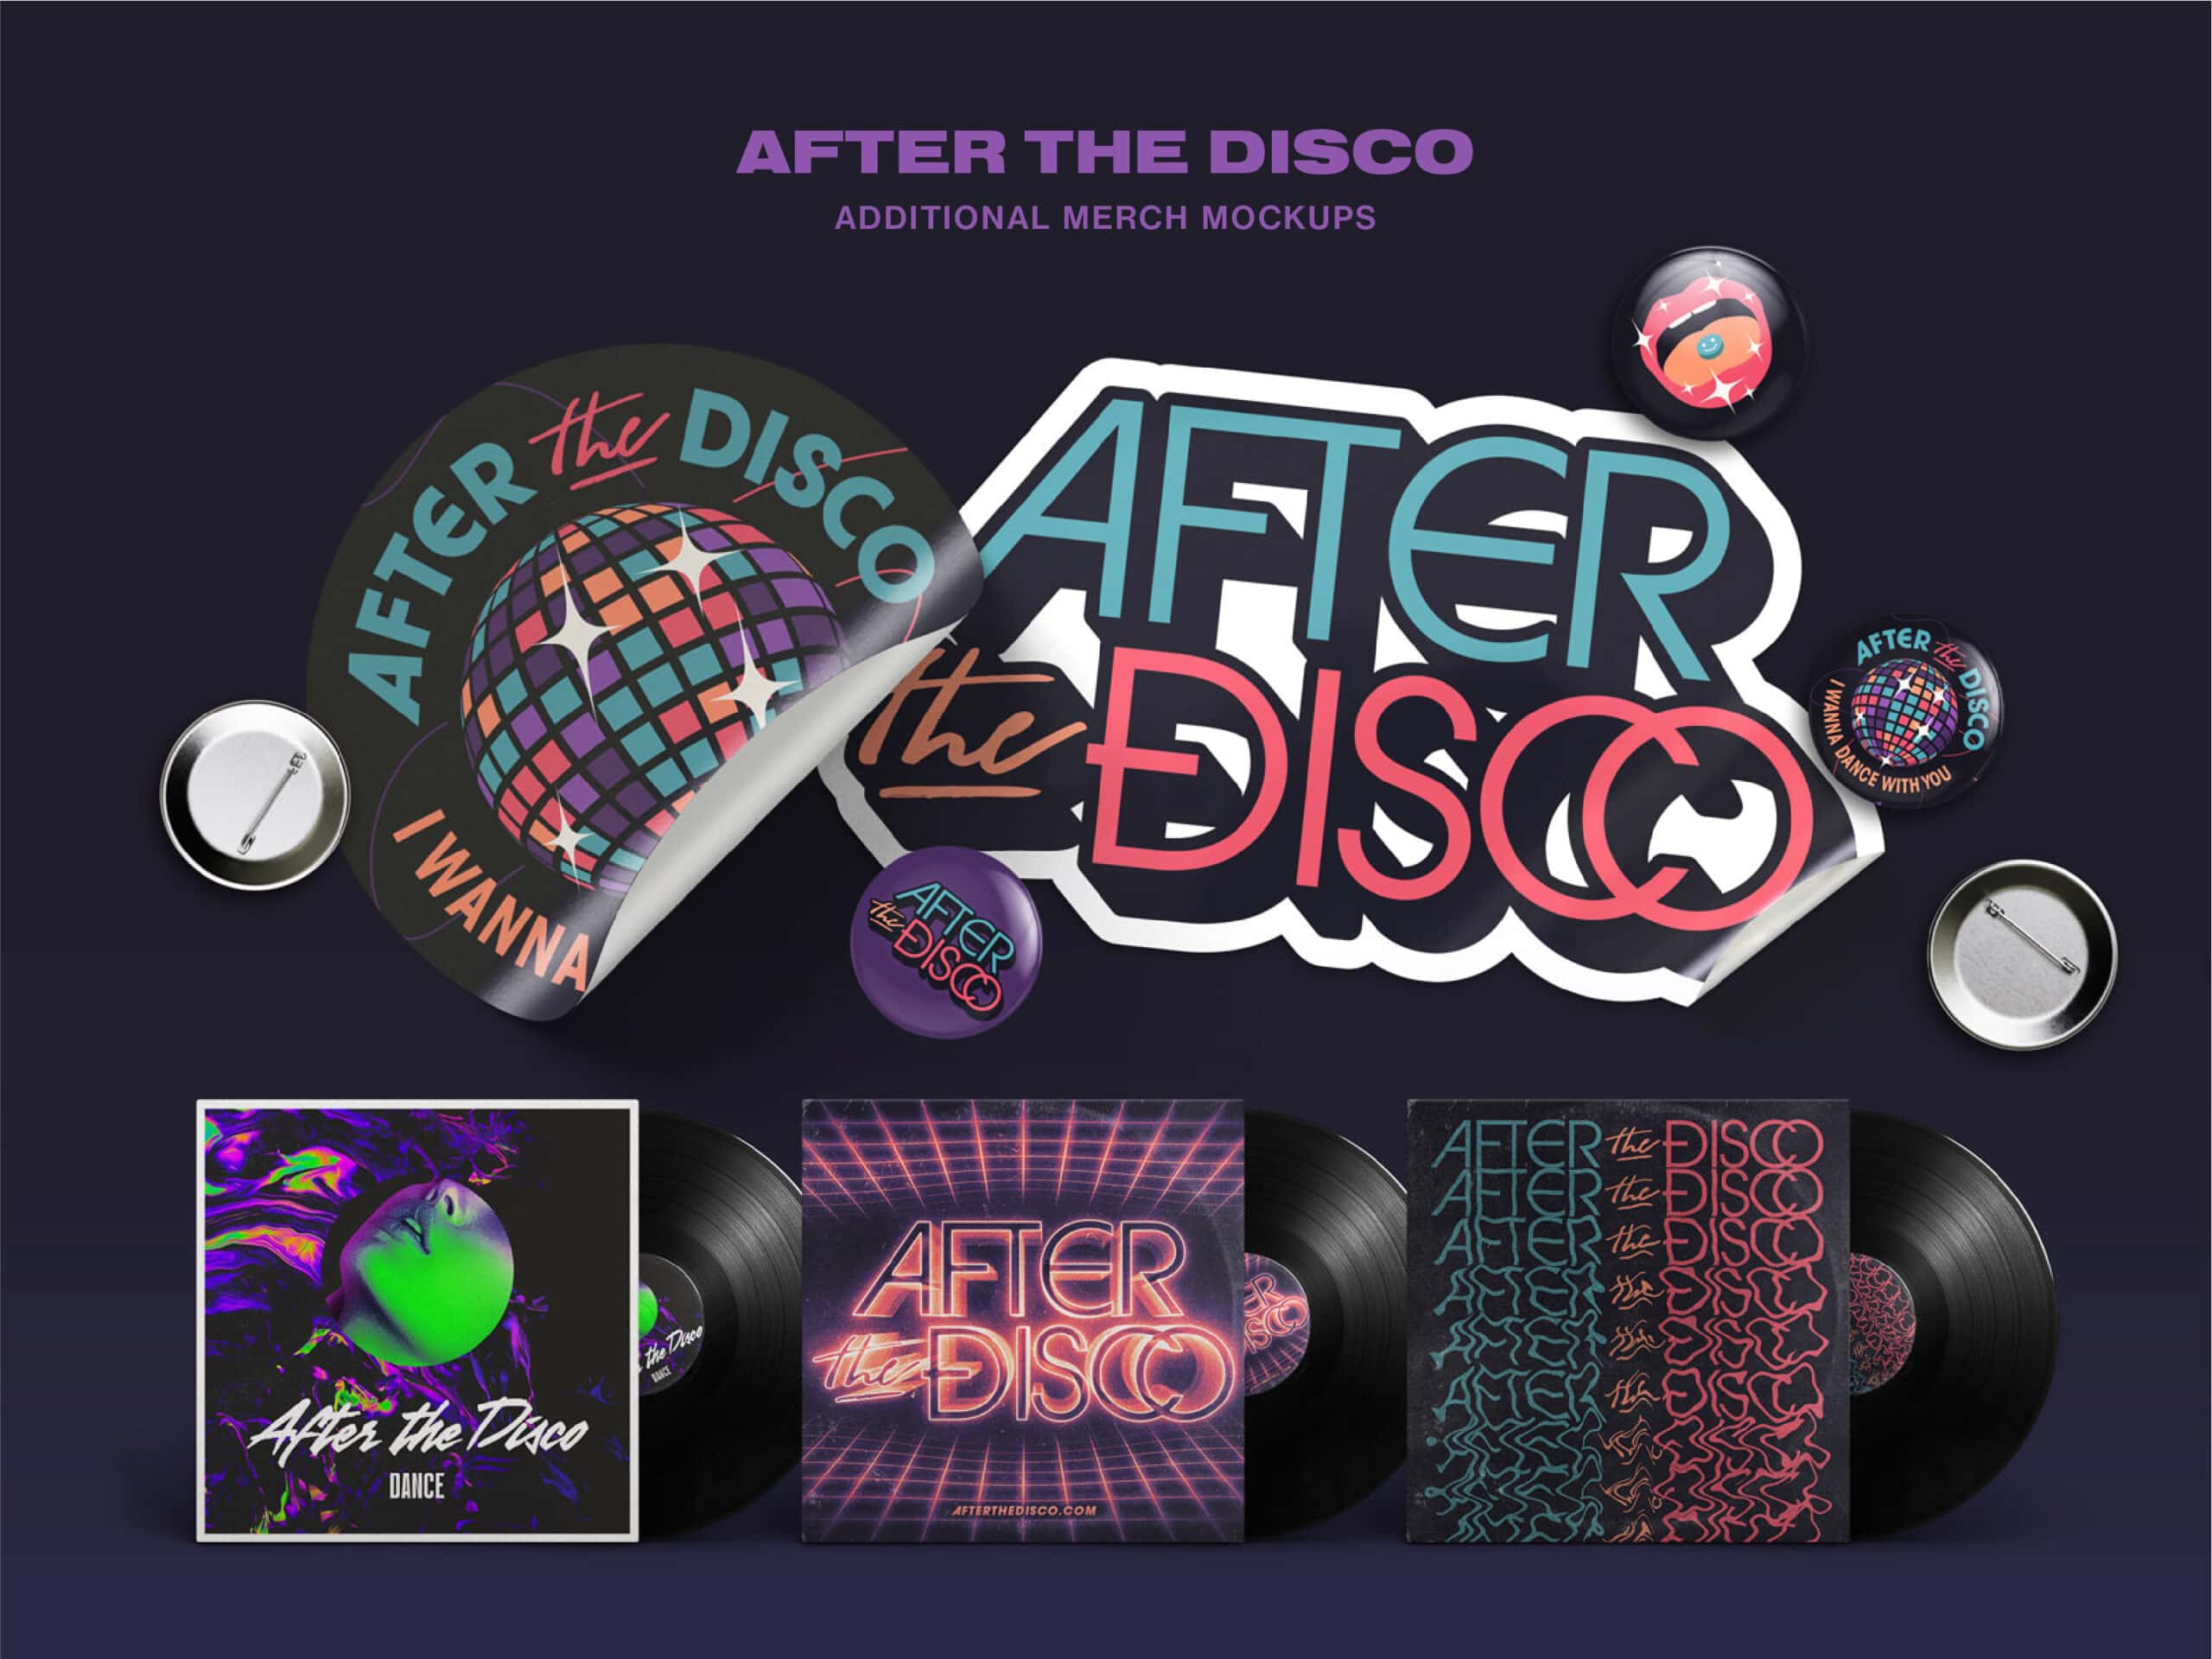 After the Disco merch mockups